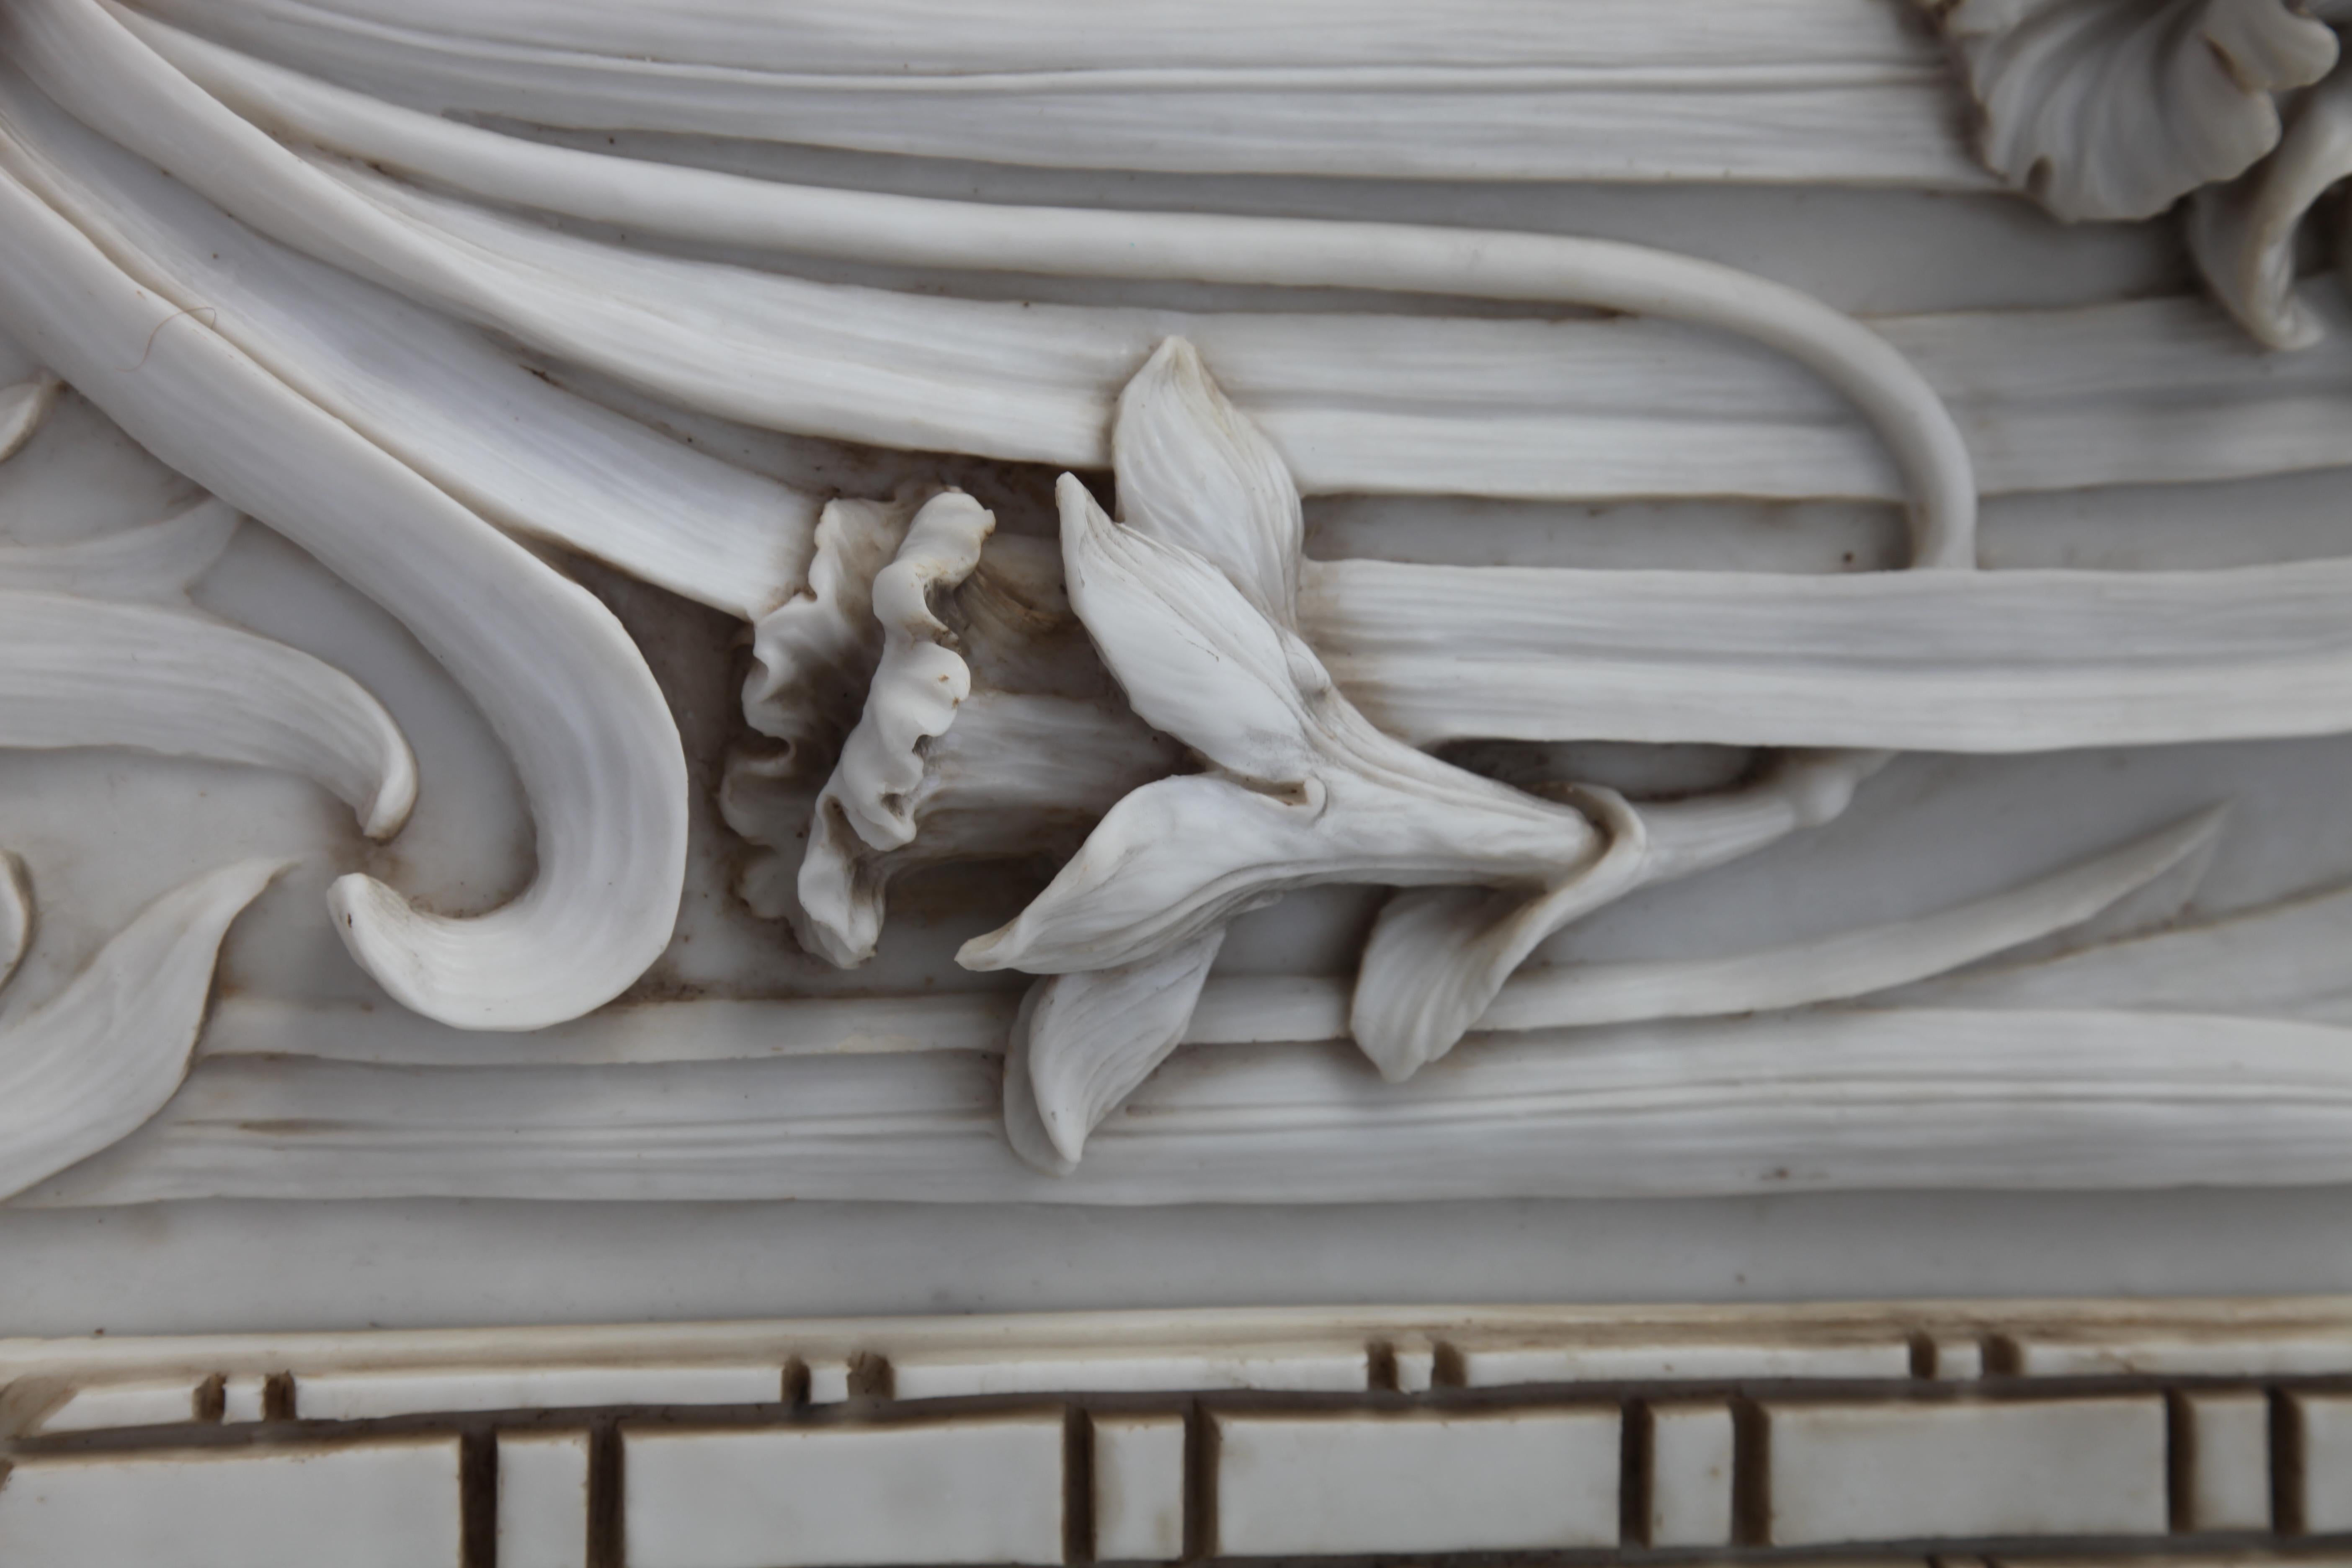 Italian Art Nouveau 3-D Alabaster Sculptural Panel with Foliage and Daffodils / Jonquils For Sale